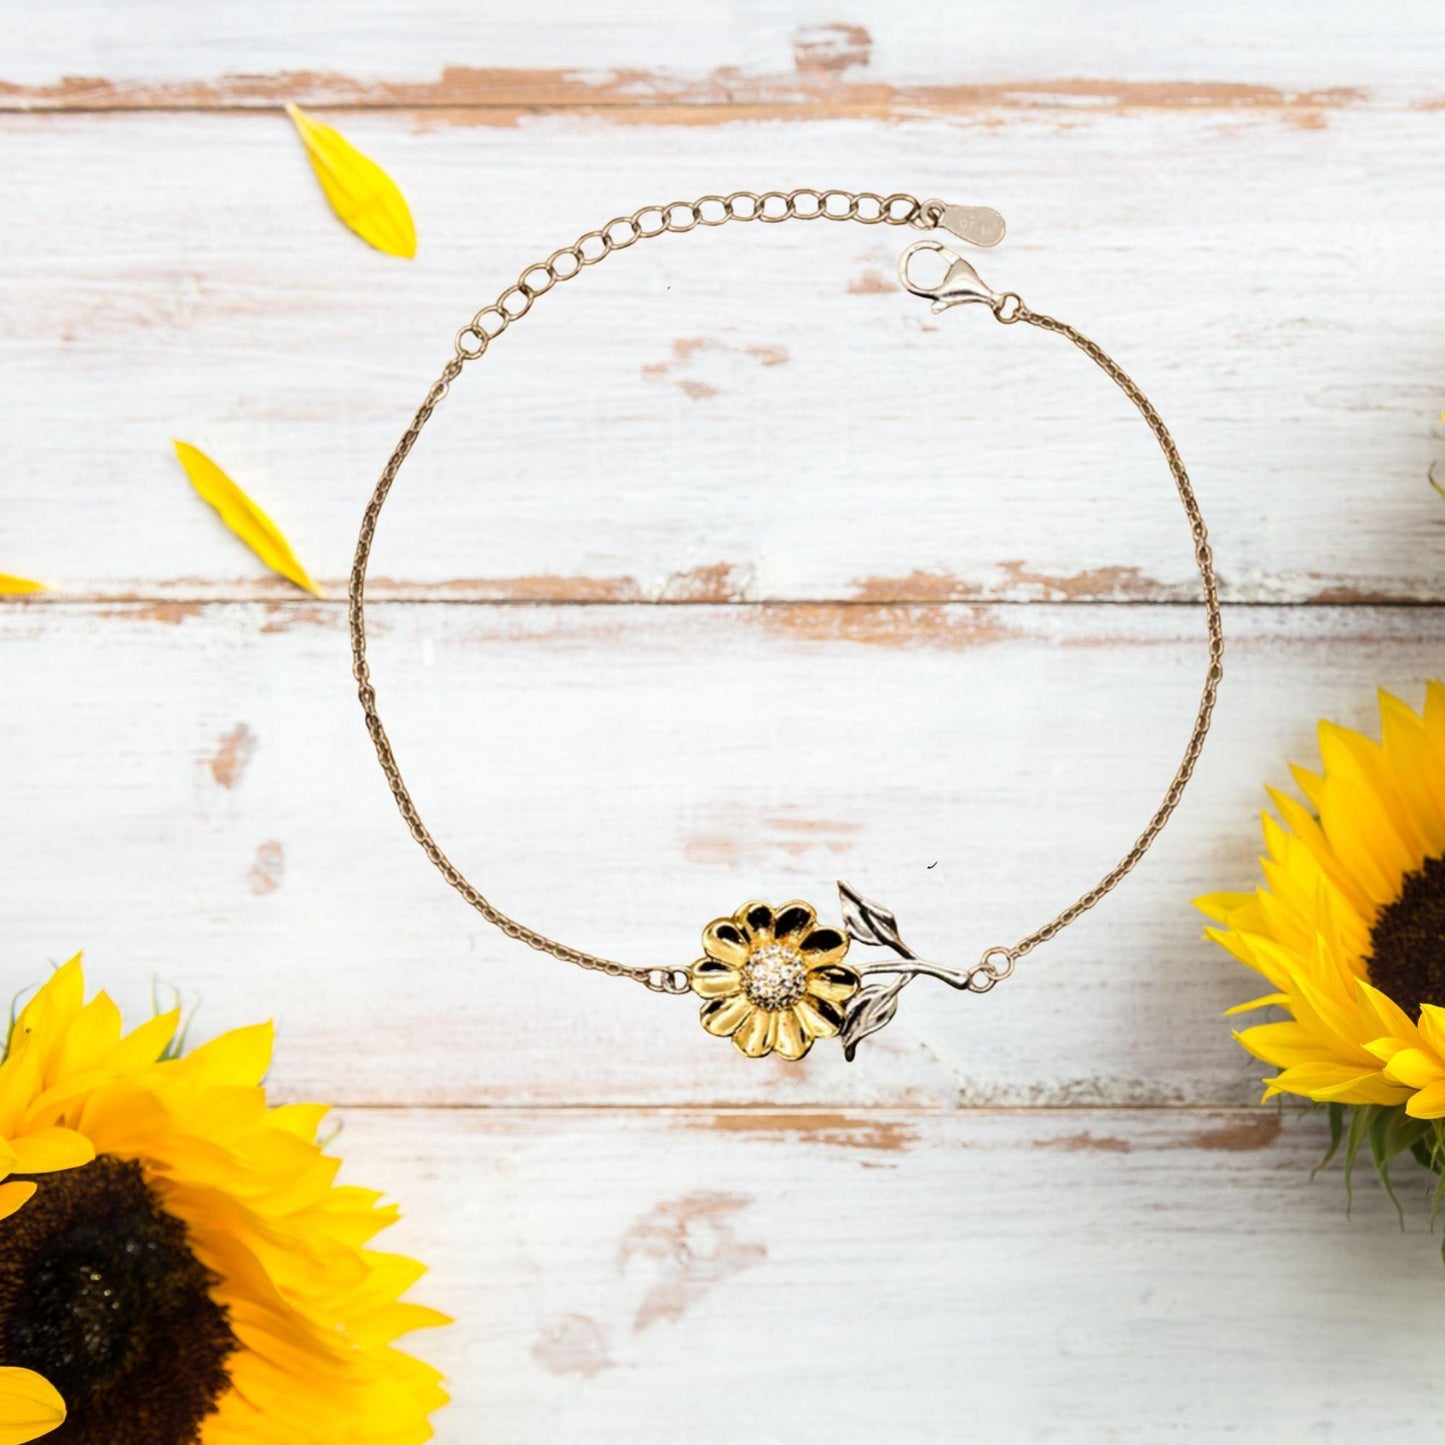 Remarkable Administrative Assistant Gifts, Your dedication and hard work, Inspirational Birthday Christmas Unique Sunflower Bracelet For Administrative Assistant, Coworkers, Men, Women, Friends - Mallard Moon Gift Shop